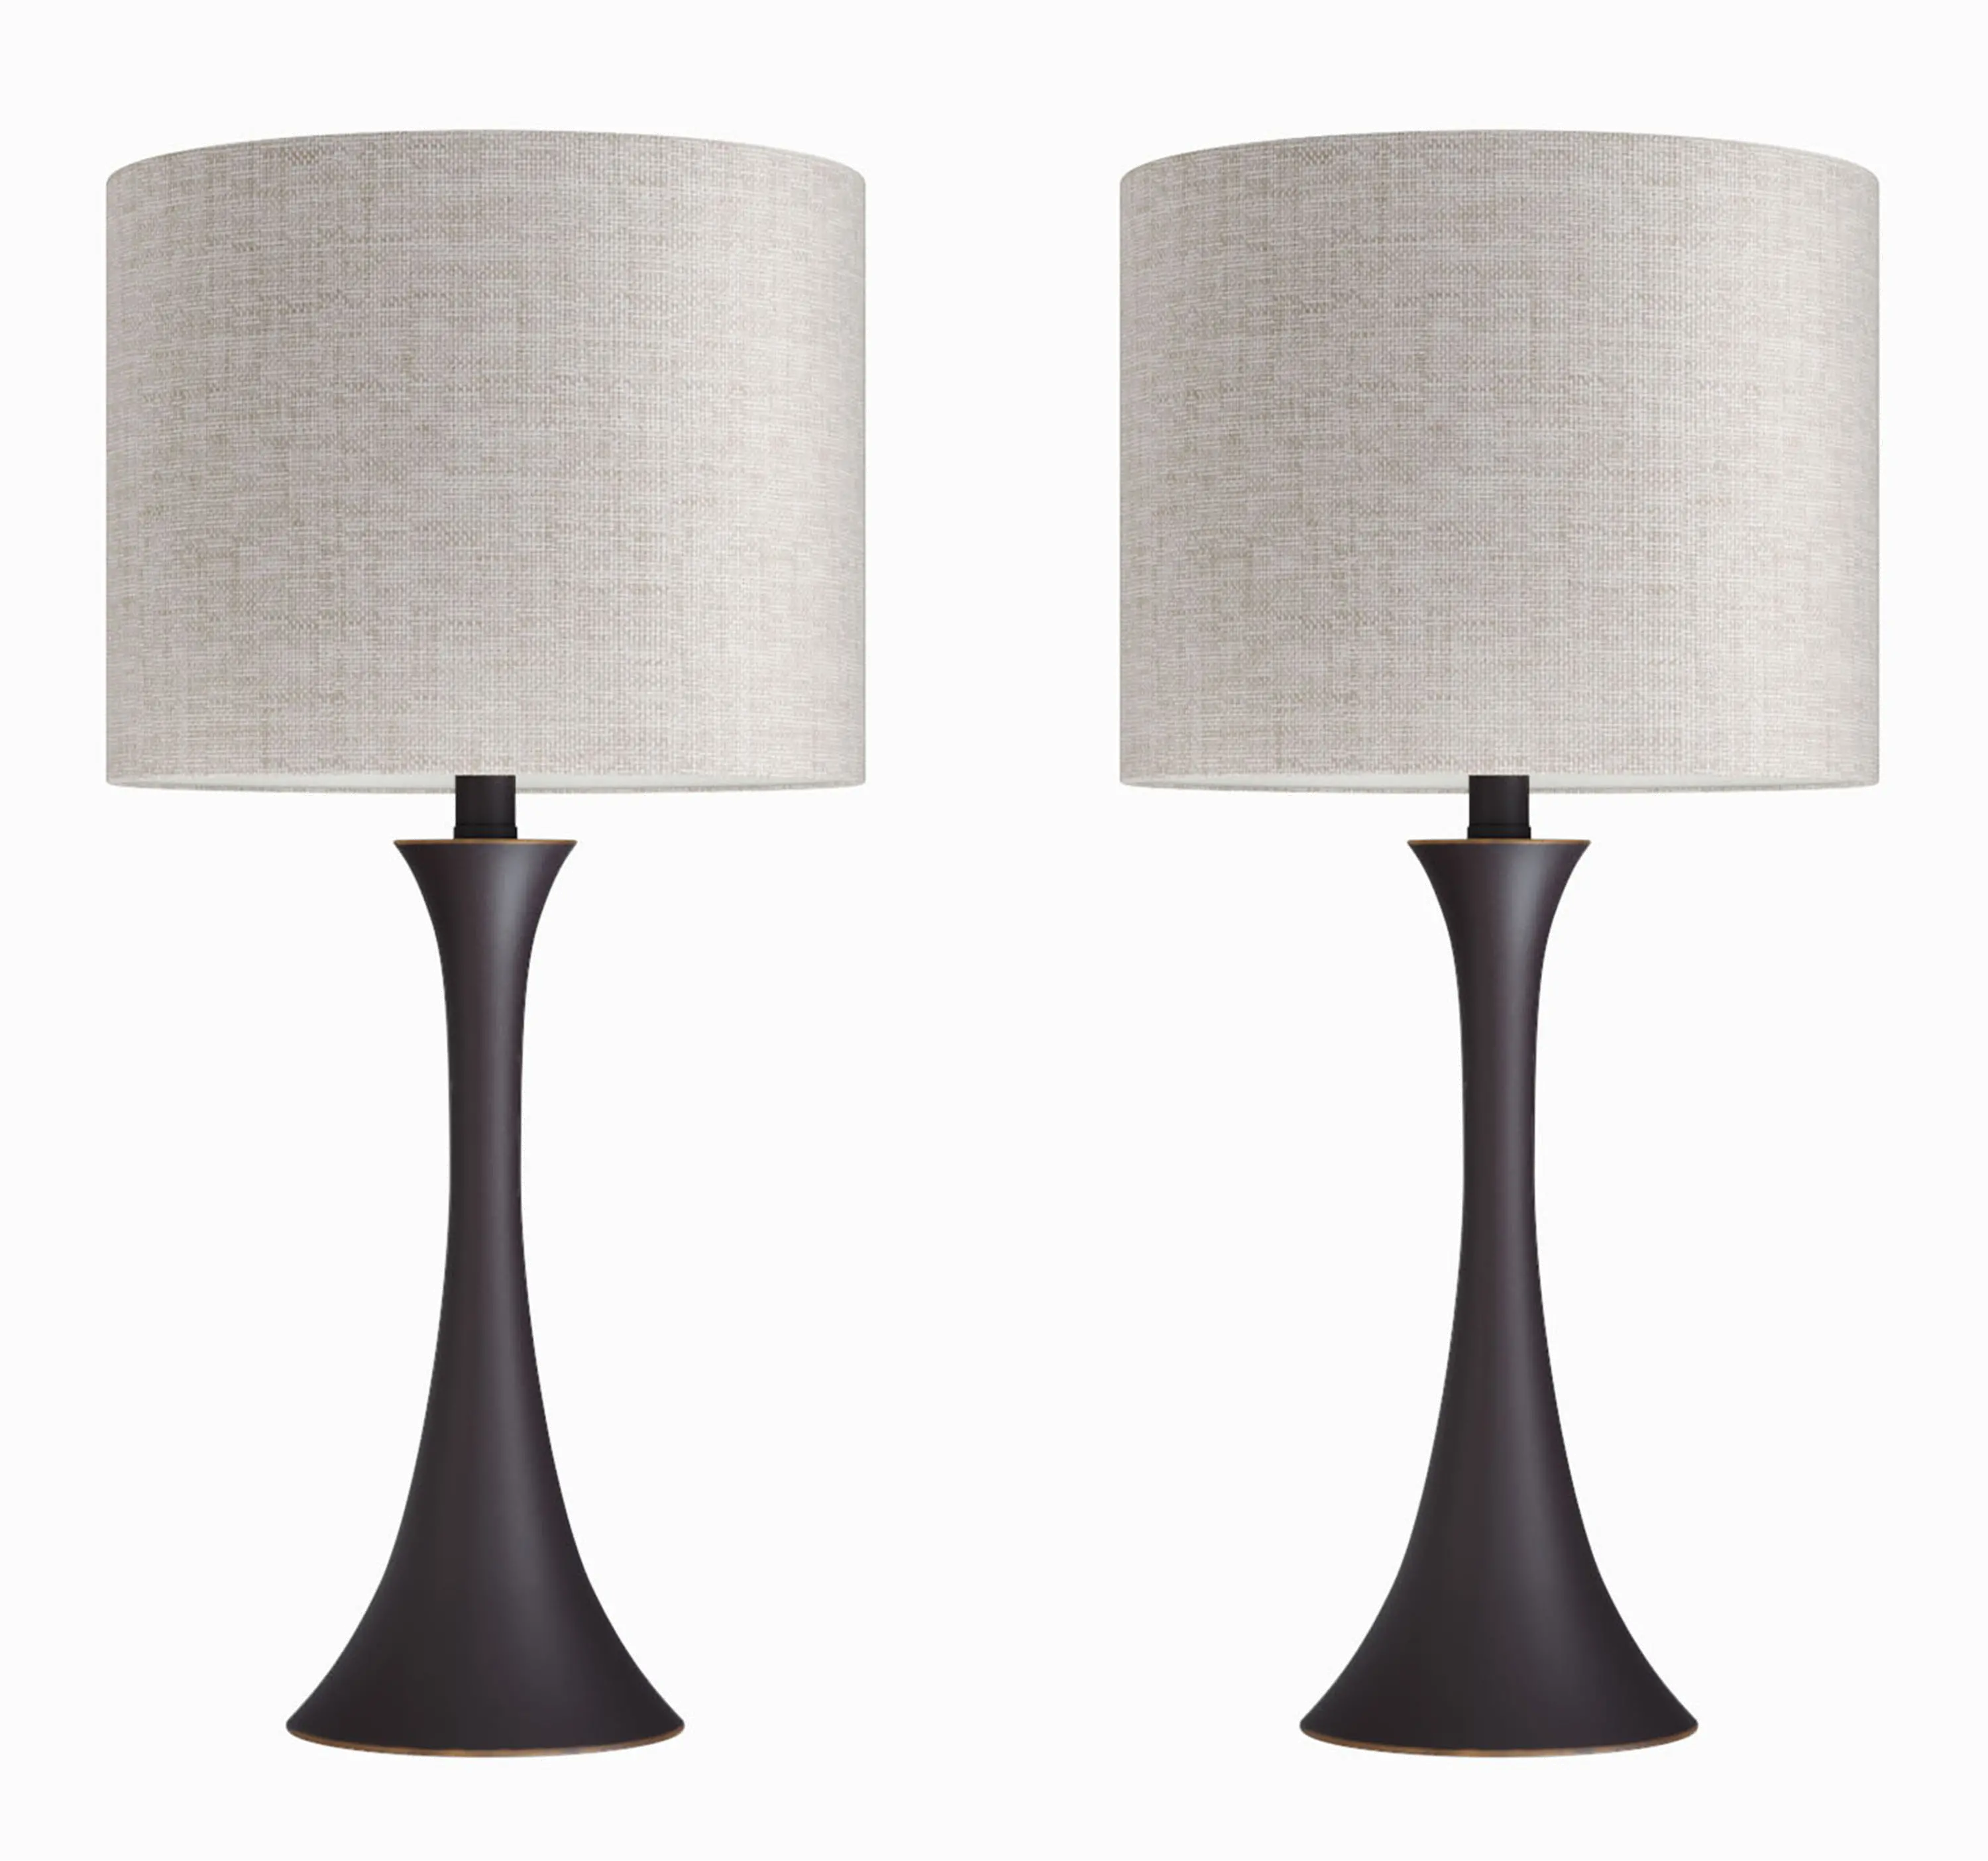 Lenuxe Bronze Table Lamps with Natural Linen Shades, Set of 2